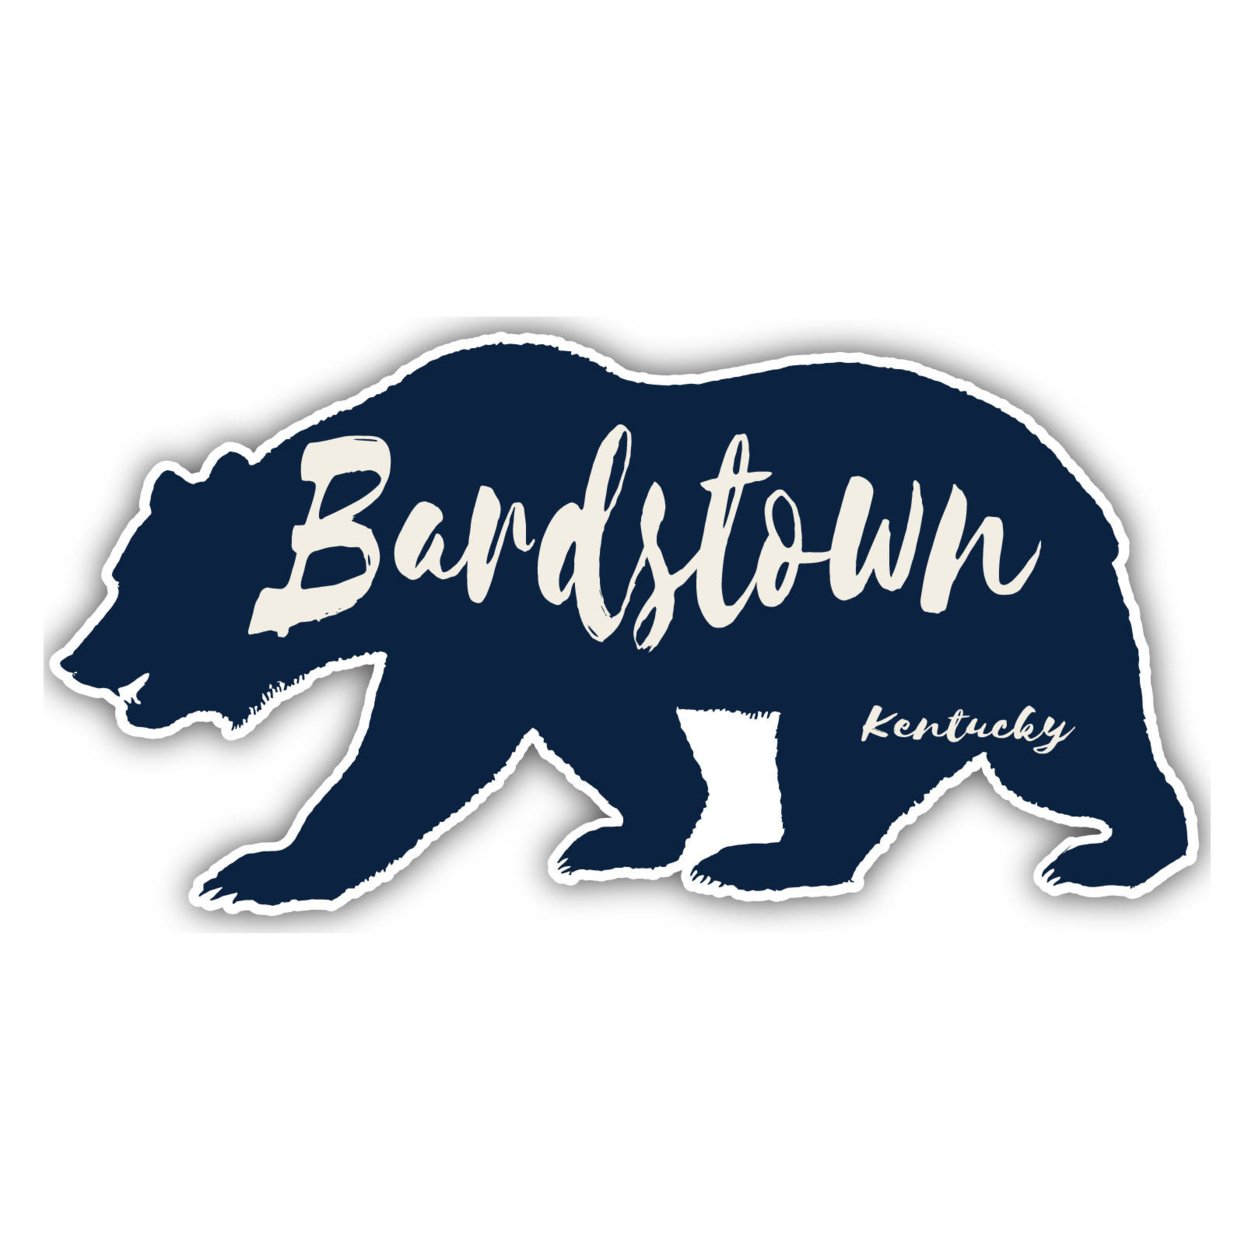 Bardstown Kentucky Souvenir Decorative Stickers (Choose Theme And Size) - 4-Pack, 4-Inch, Bear